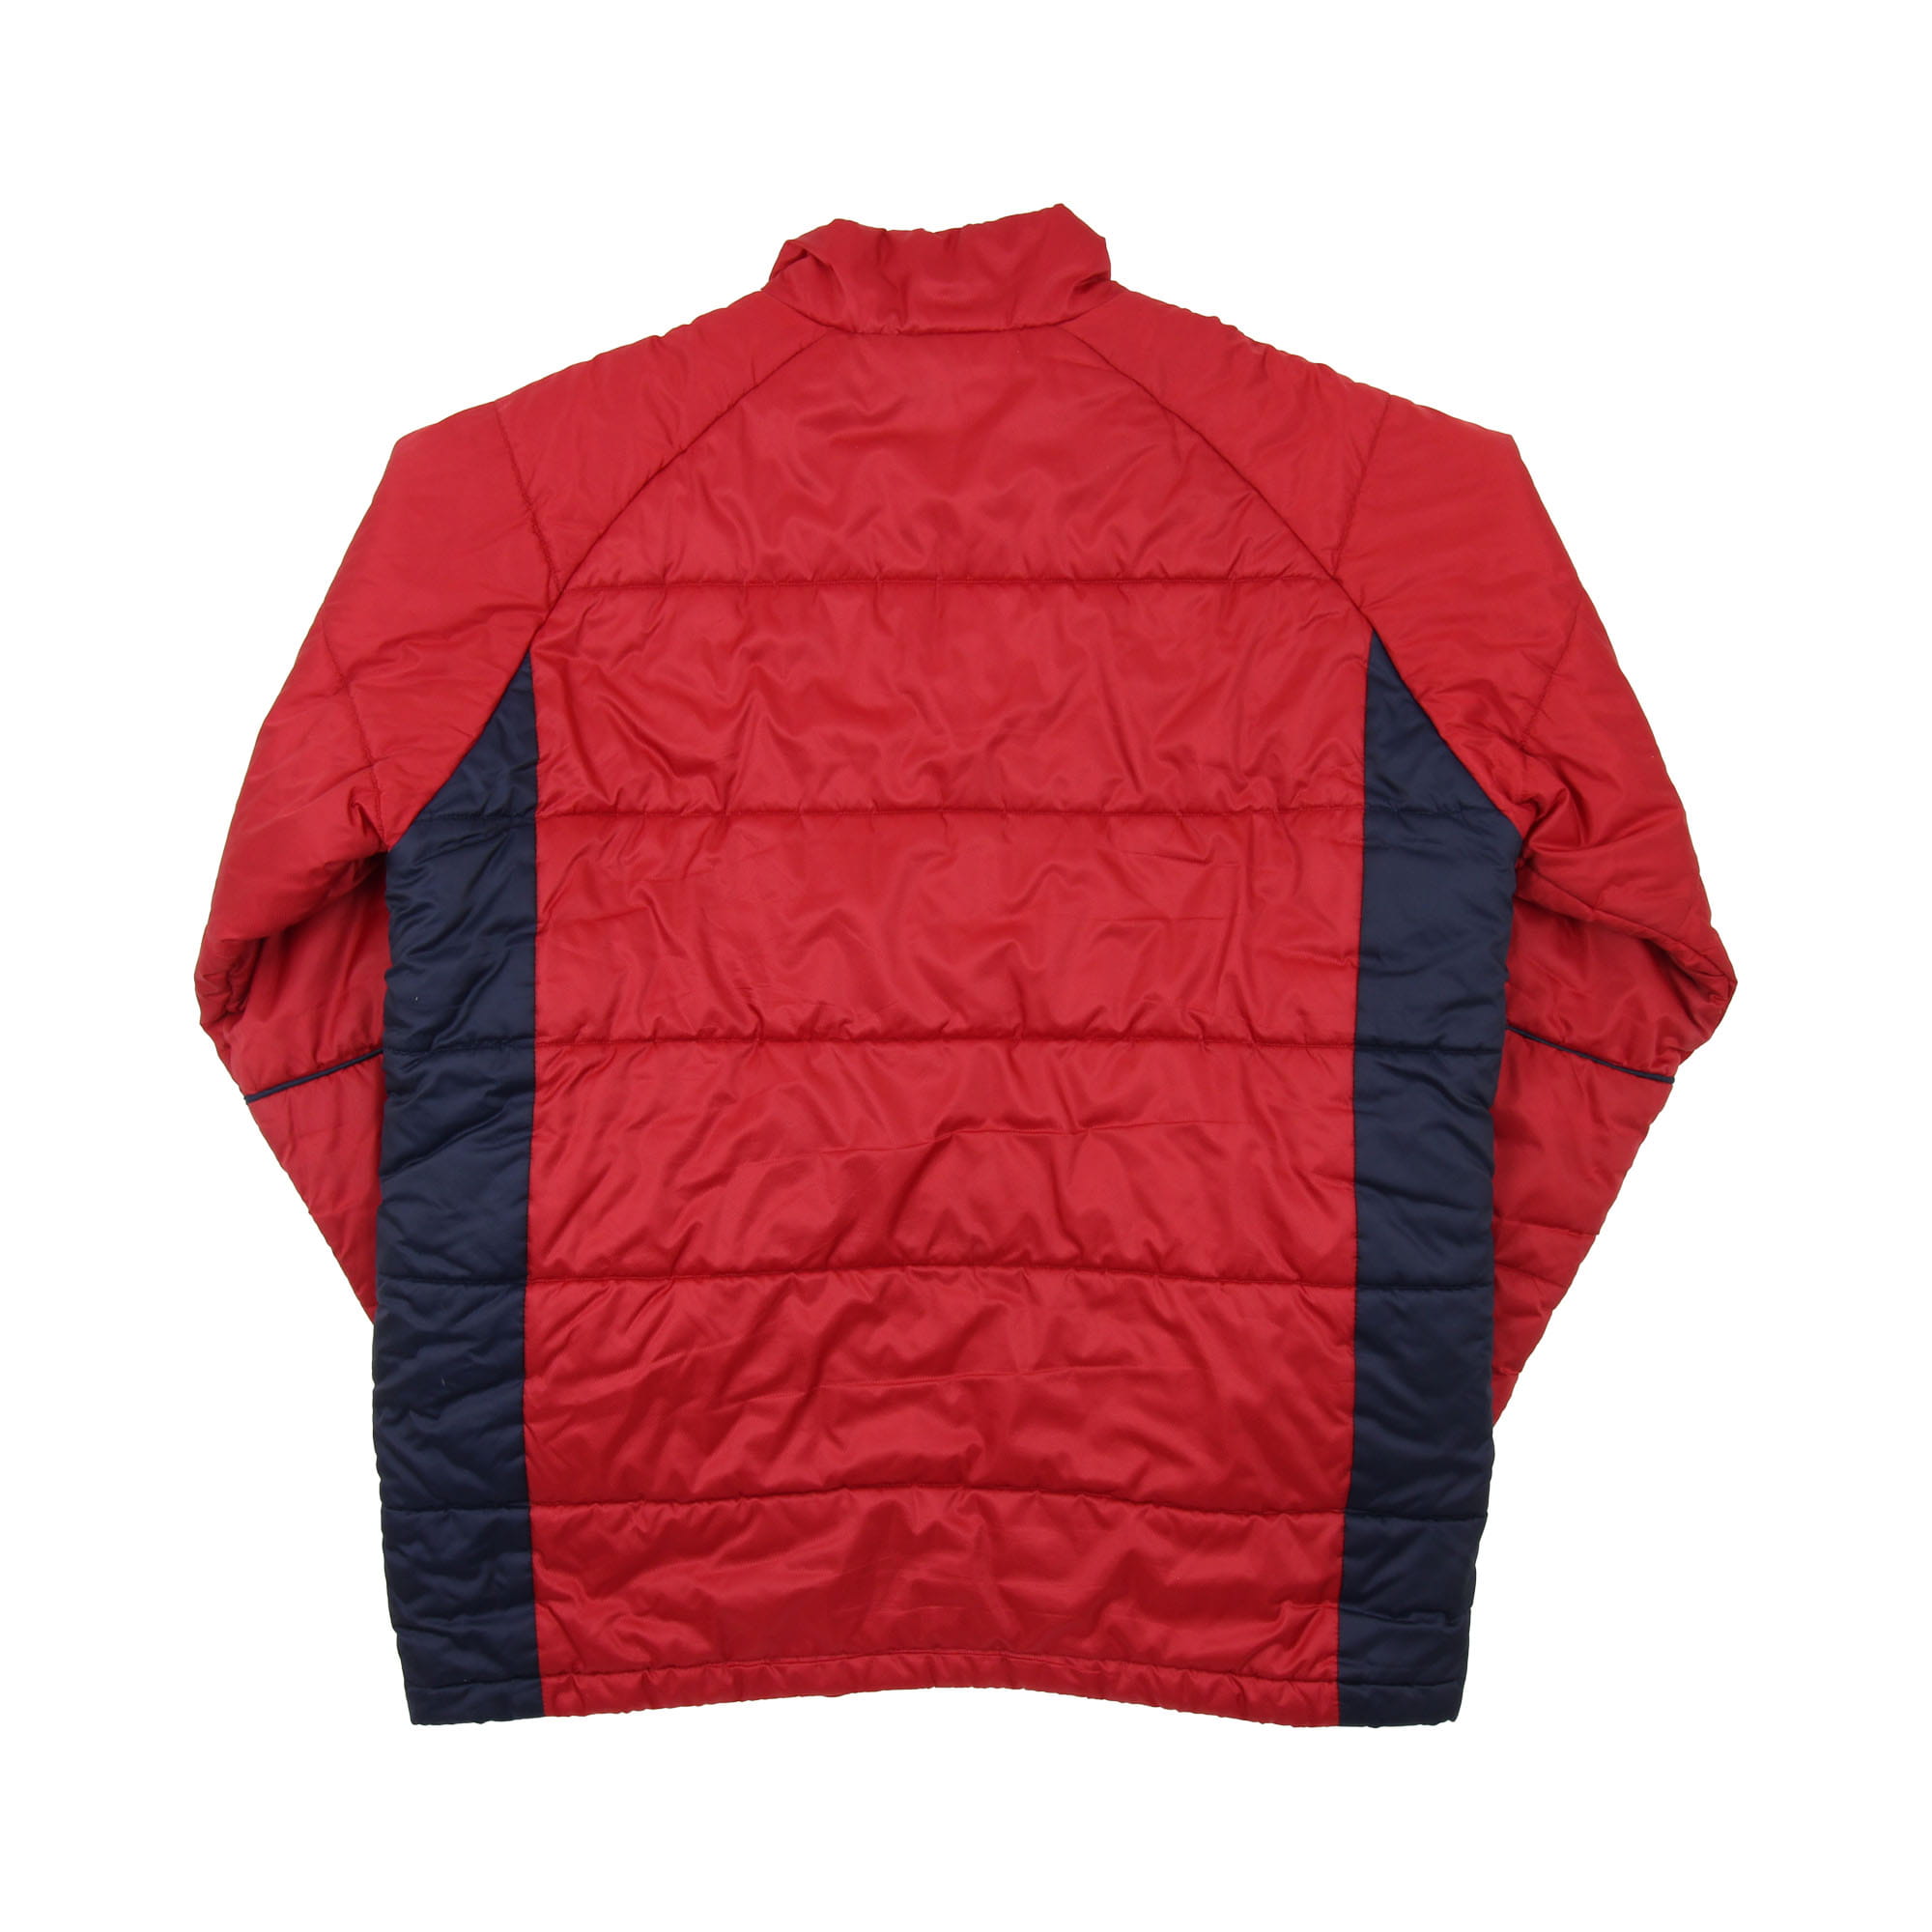 Adidas Puffer Jacket Red -  L